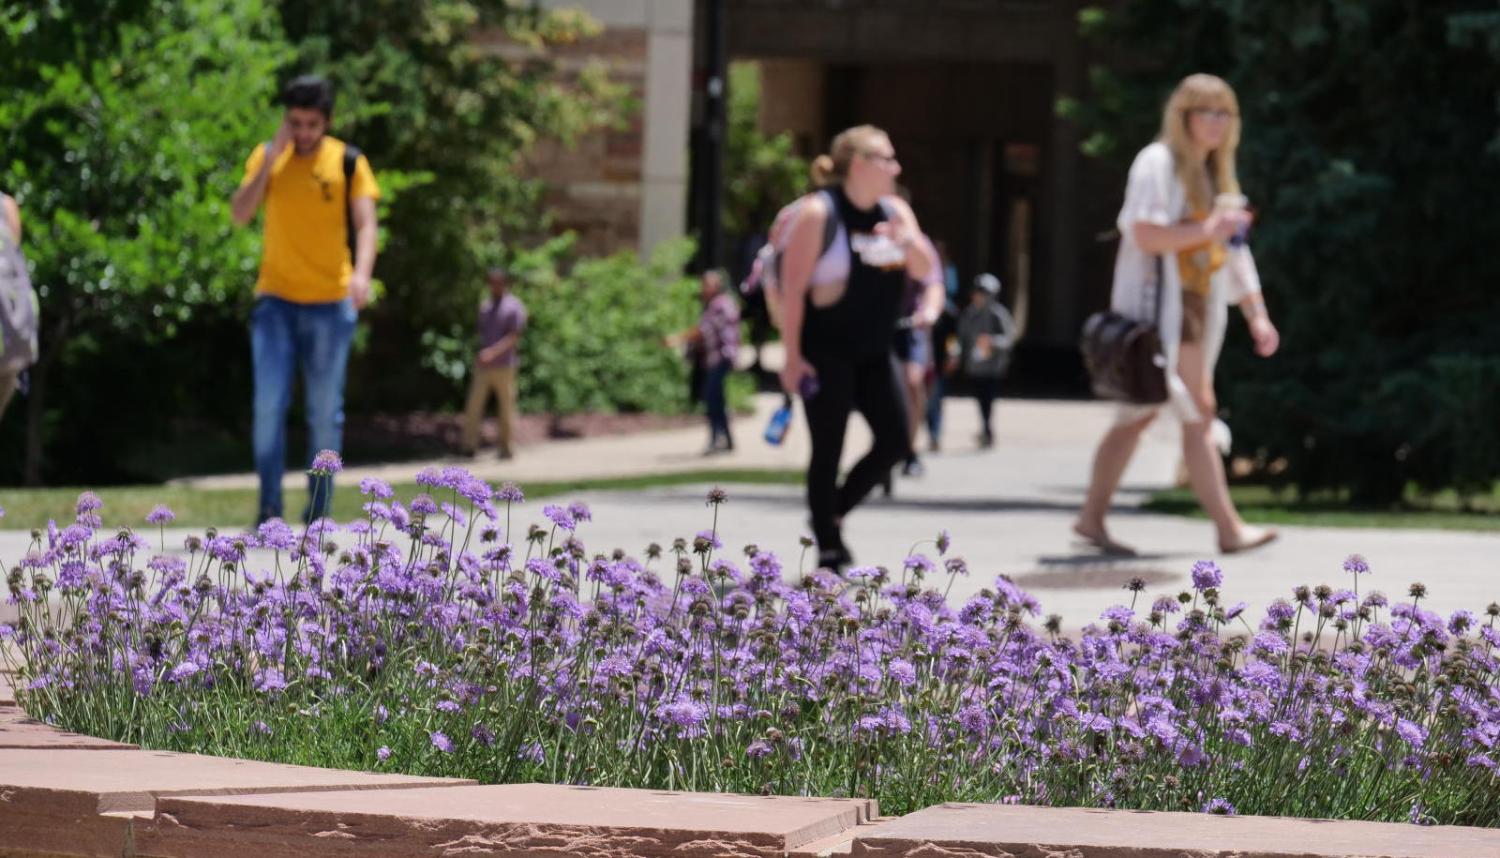 Students walk outside on campus with flowers blooming